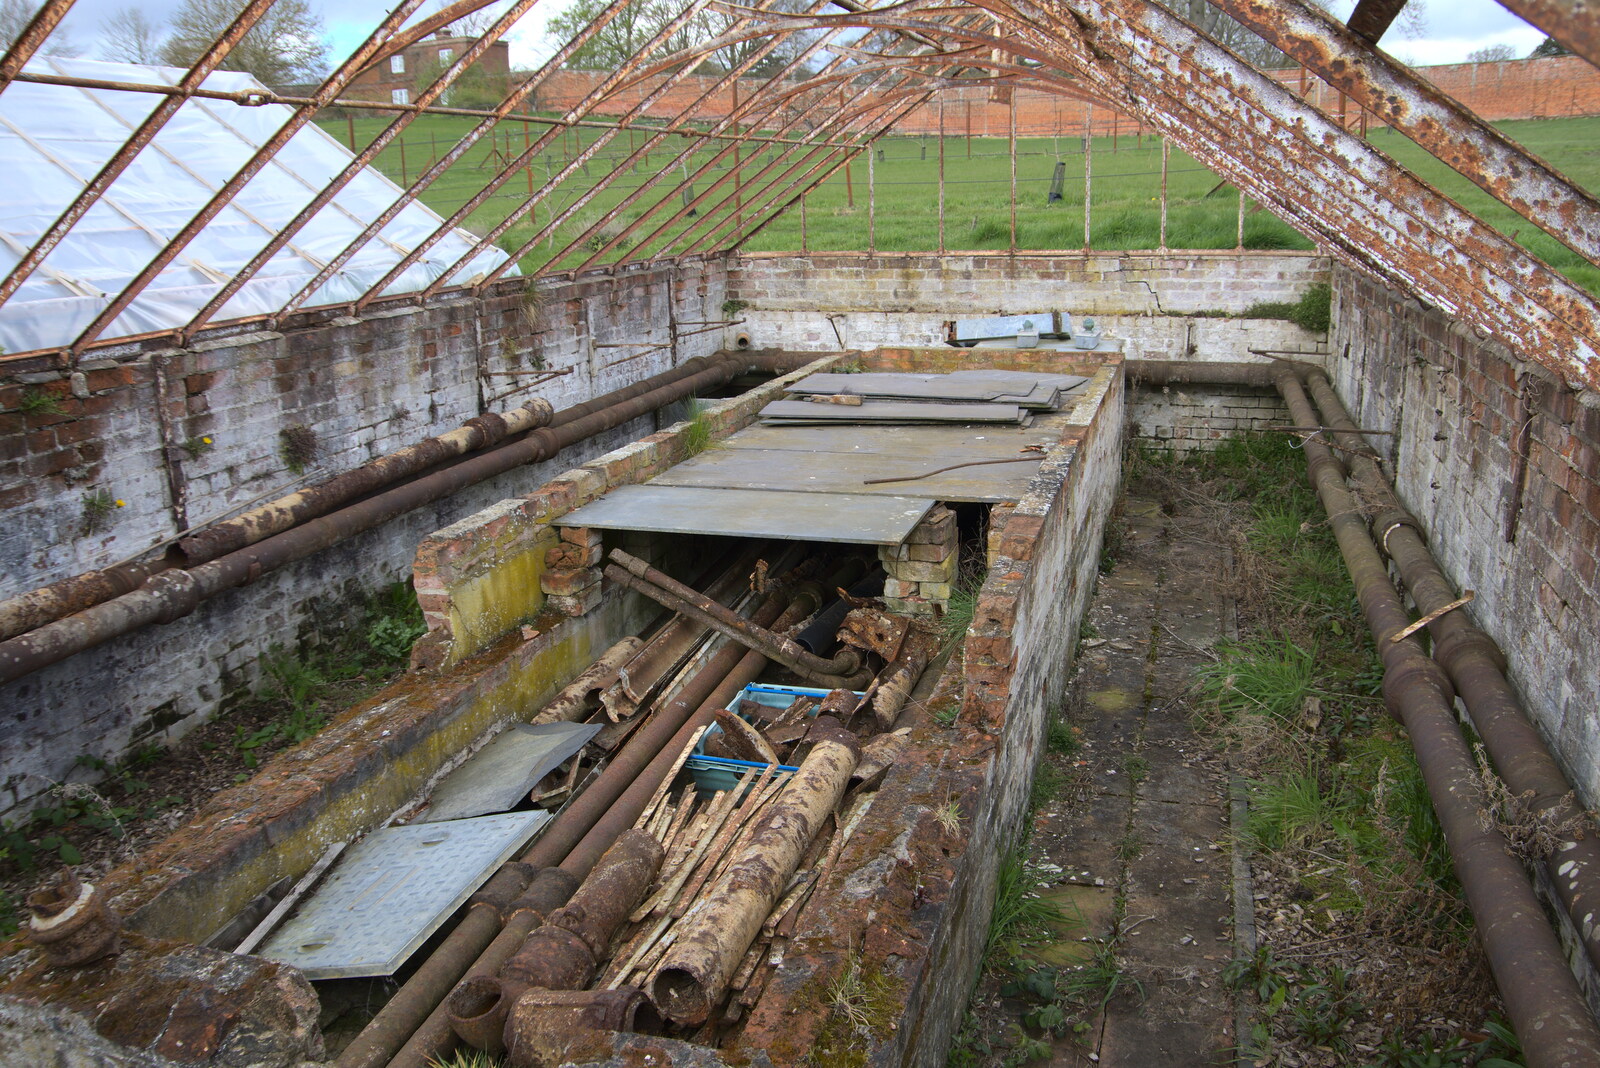 An even-more derelict greenhouse from A Return to Ickworth House, Horringer, Suffolk - 11th April 2021